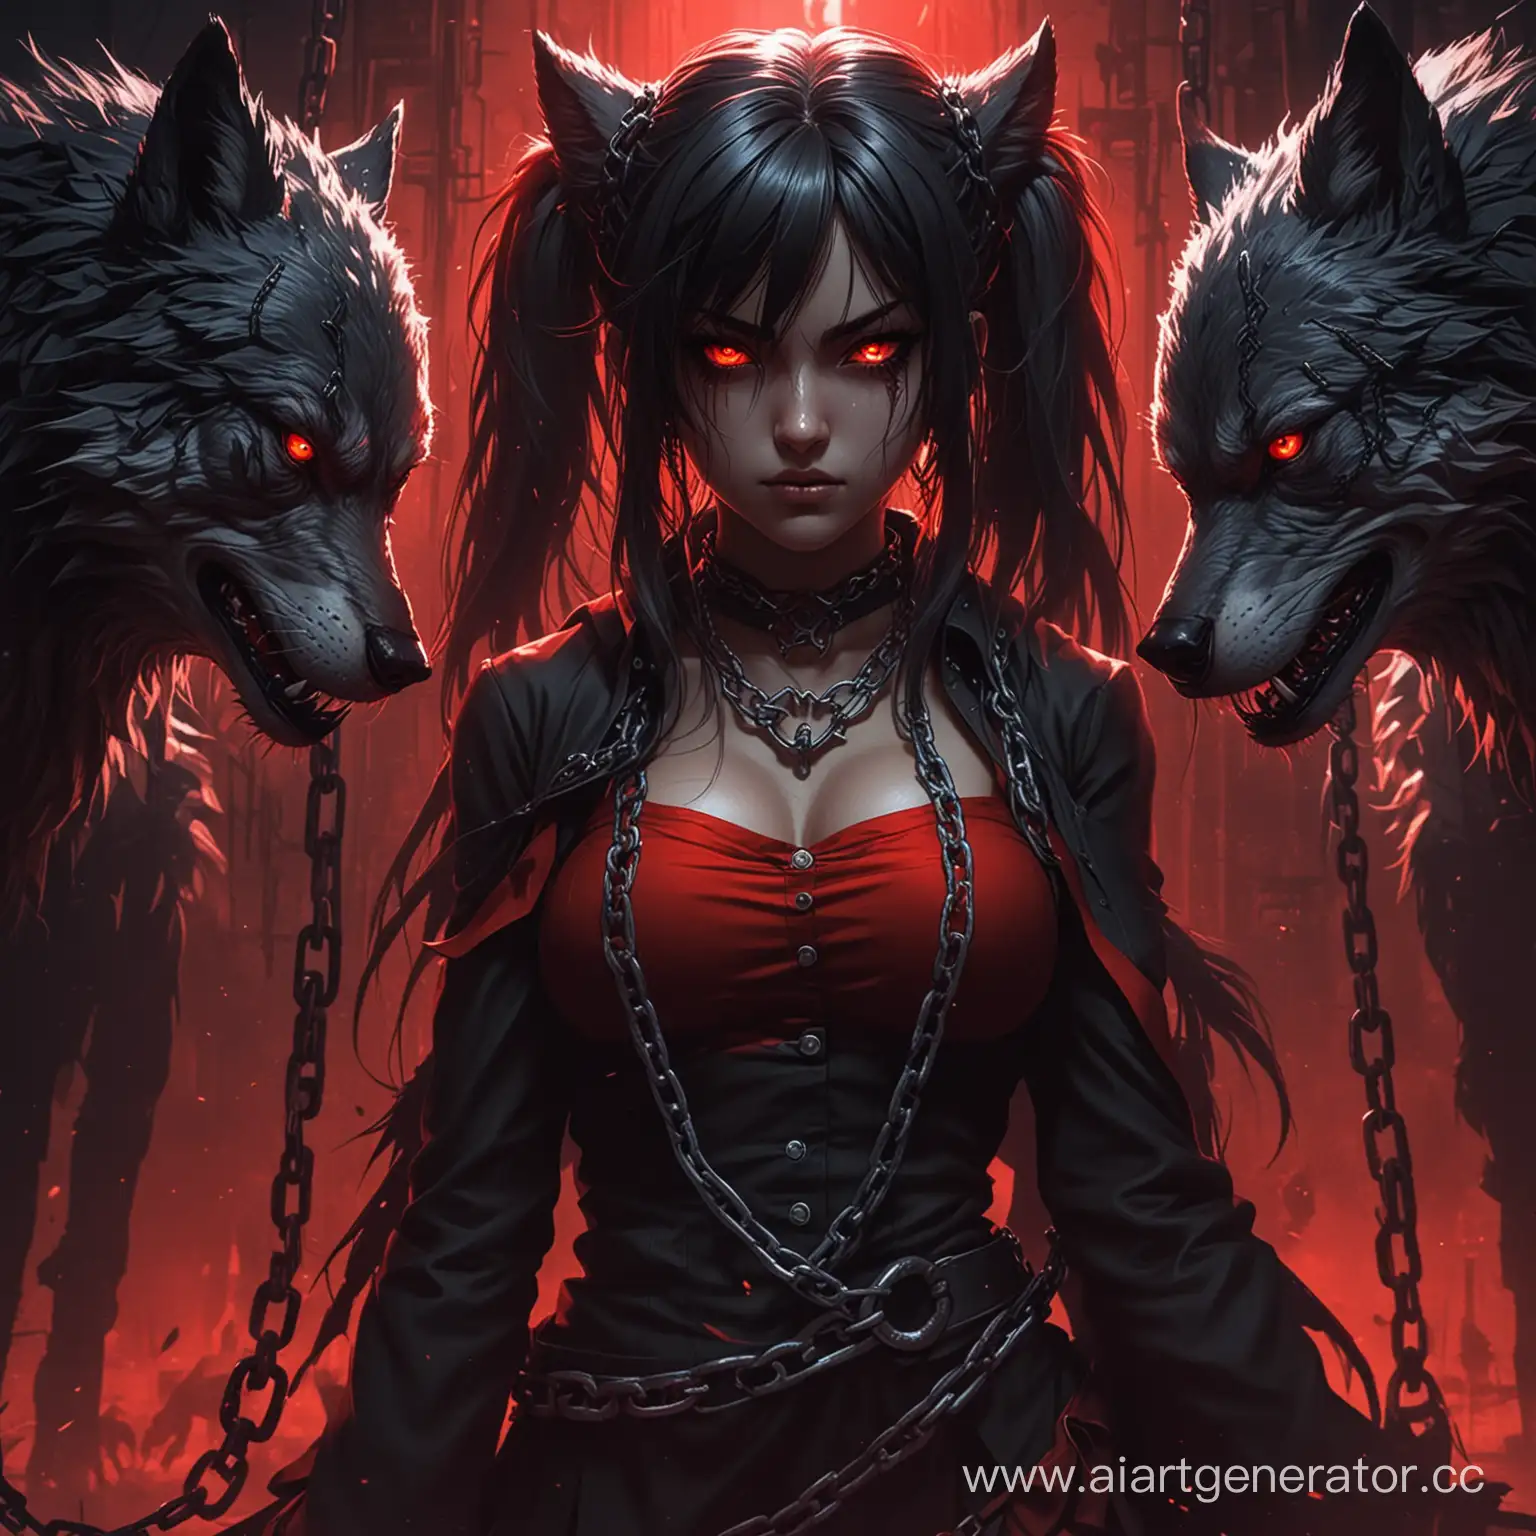 angry wolfs, chains, anime girl, dark style, red filter,, detail shadows and light, dark fantasy